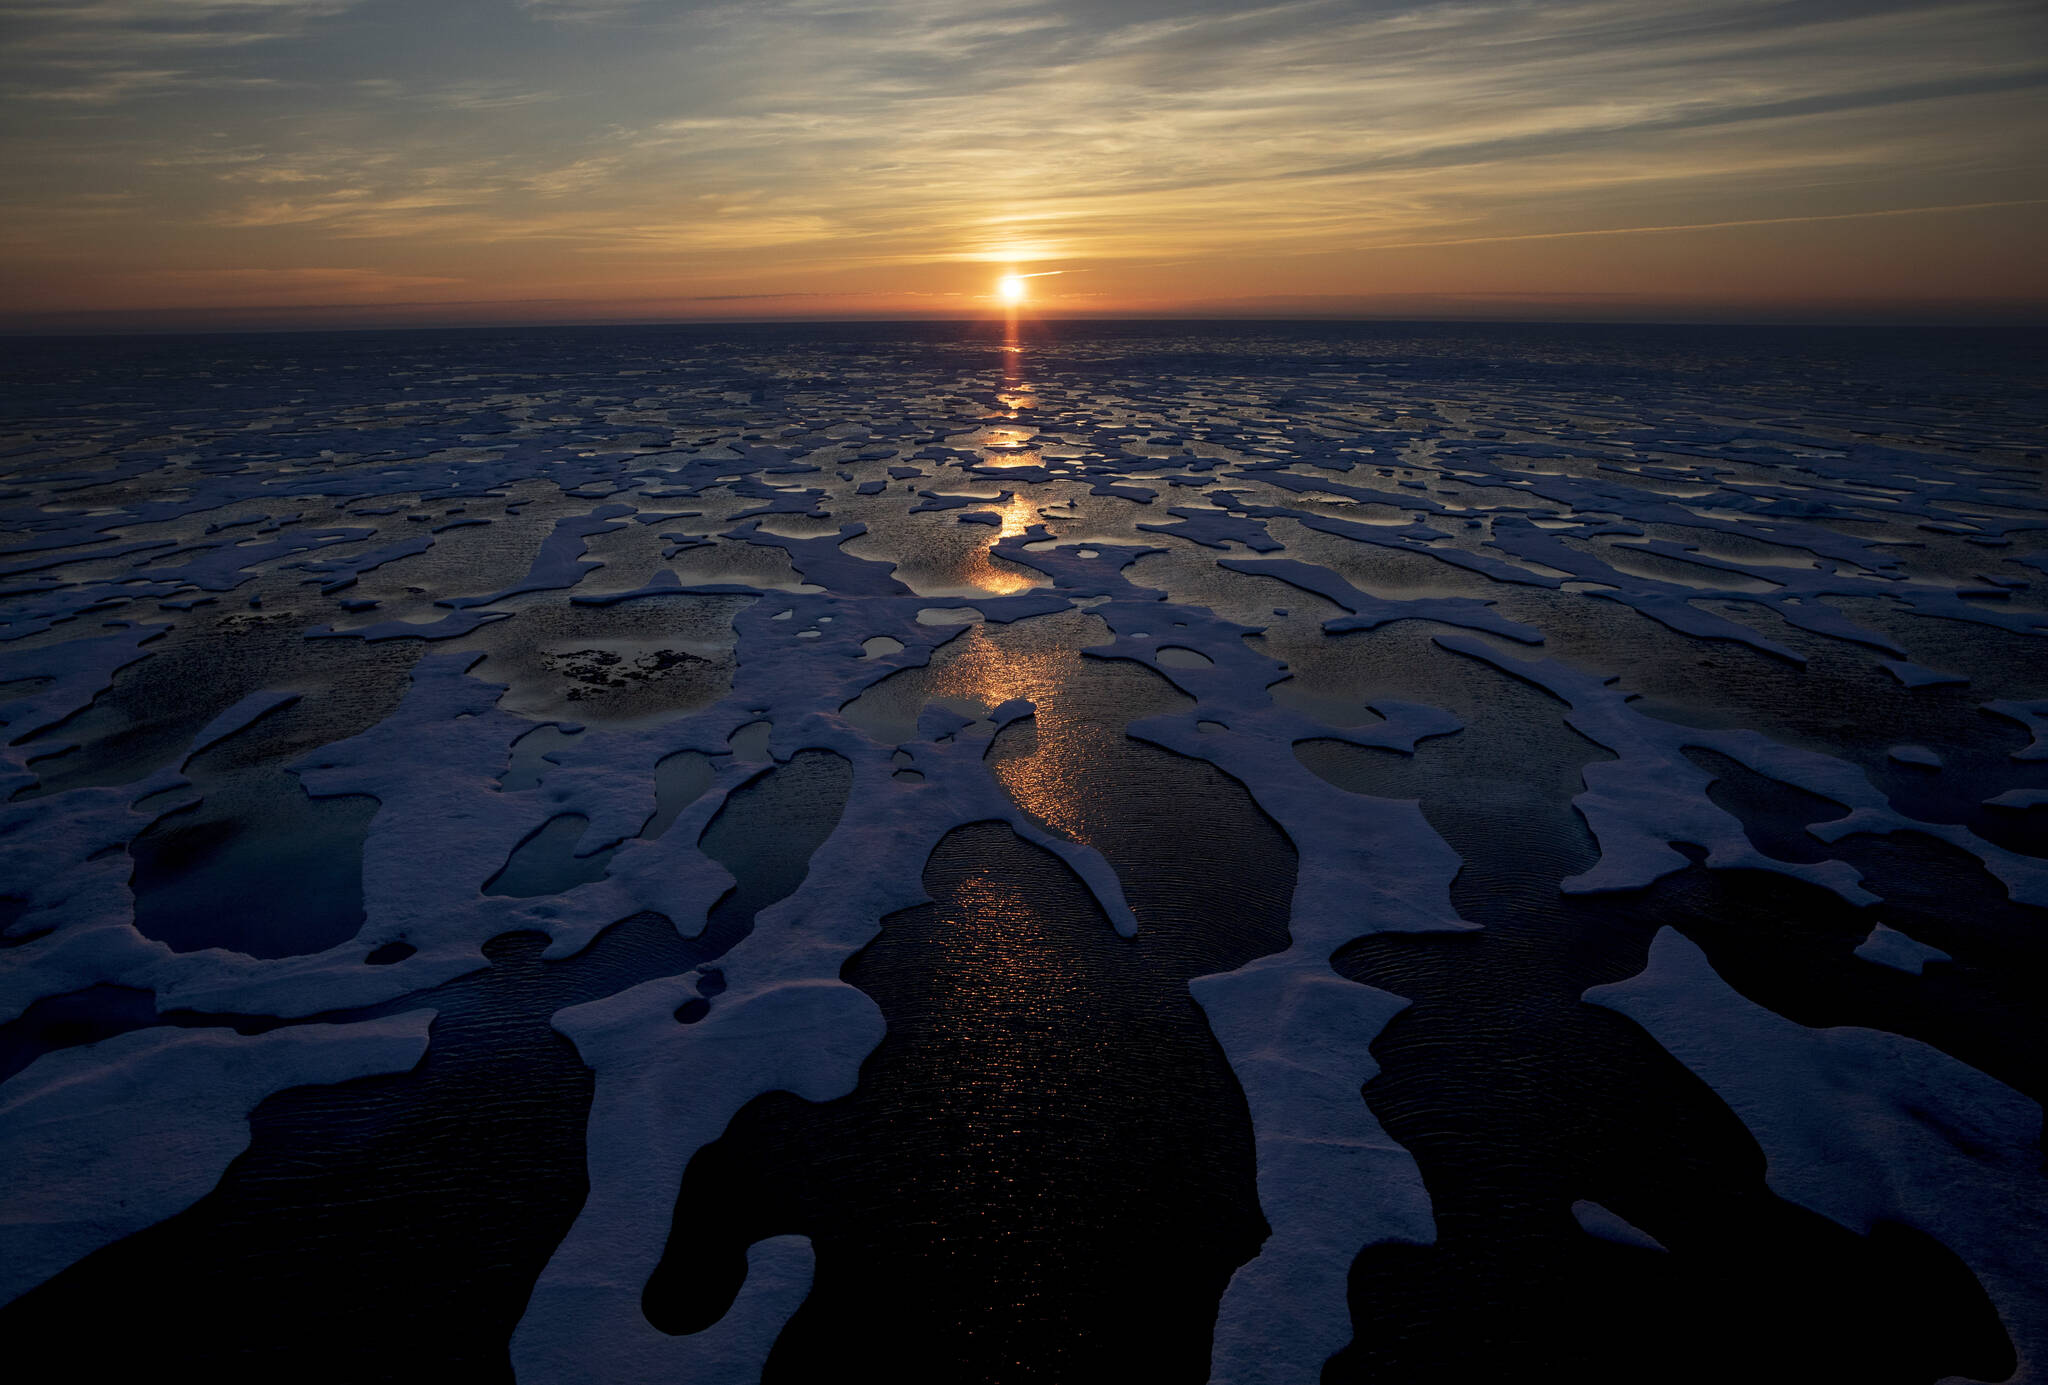 In this July 2017 photo, the midnight sun shines across sea ice along the Northwest Passage in the Canadian Arctic Archipelago. The Biden administration is stepping up its work to figure about what to do about the thawing Arctic, which is warming three times faster than the rest of the world. The White House said Friday, Sept. 24, 2021, that it is reactivating the Arctic Executive Steering Committee, which coordinates domestic regulations and works with other Arctic nations. It also is adding six new members to the U.S. Arctic Research Commission, including two indigenous Alaskans. (AP Photo / David Goldman)